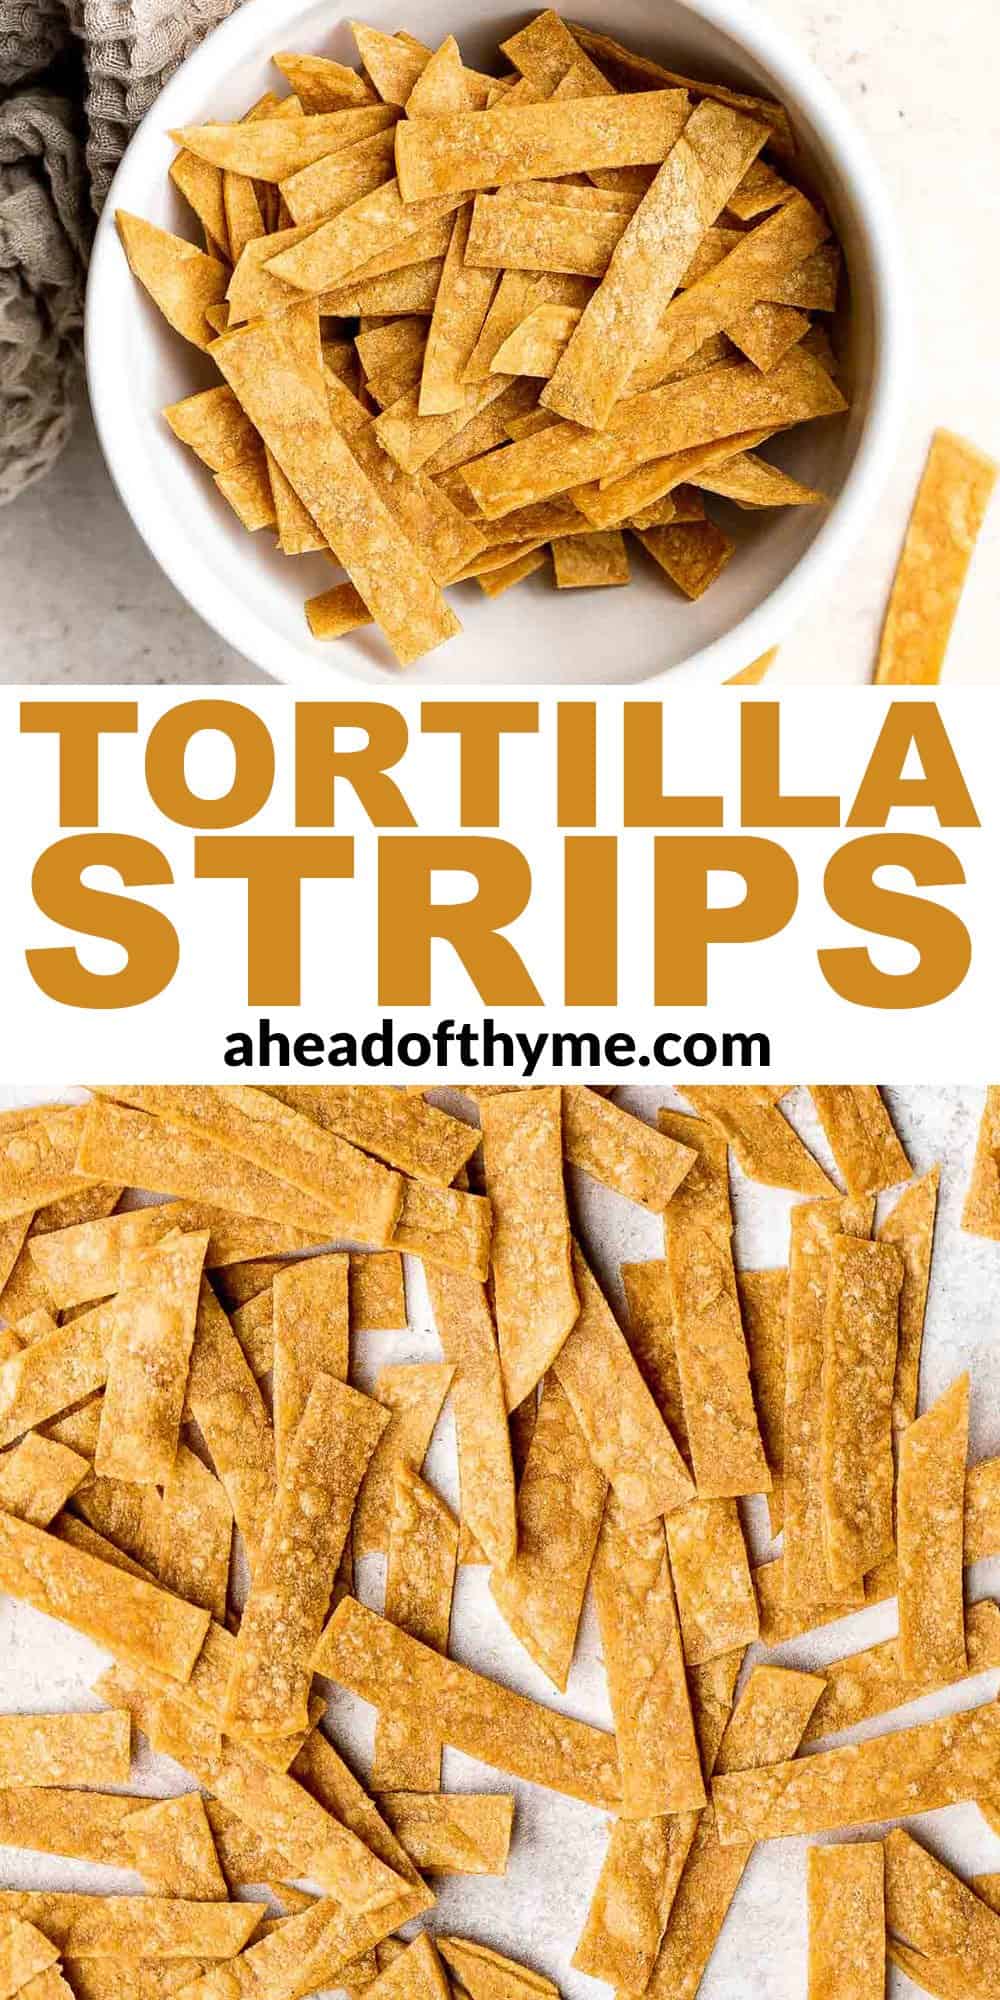 Homemade tortilla strips are crispy, crunchy, delicious, and easy to make using 3 simple ingredients. Serve as a snack or a topping on soups and salad. | aheadofthyme.com